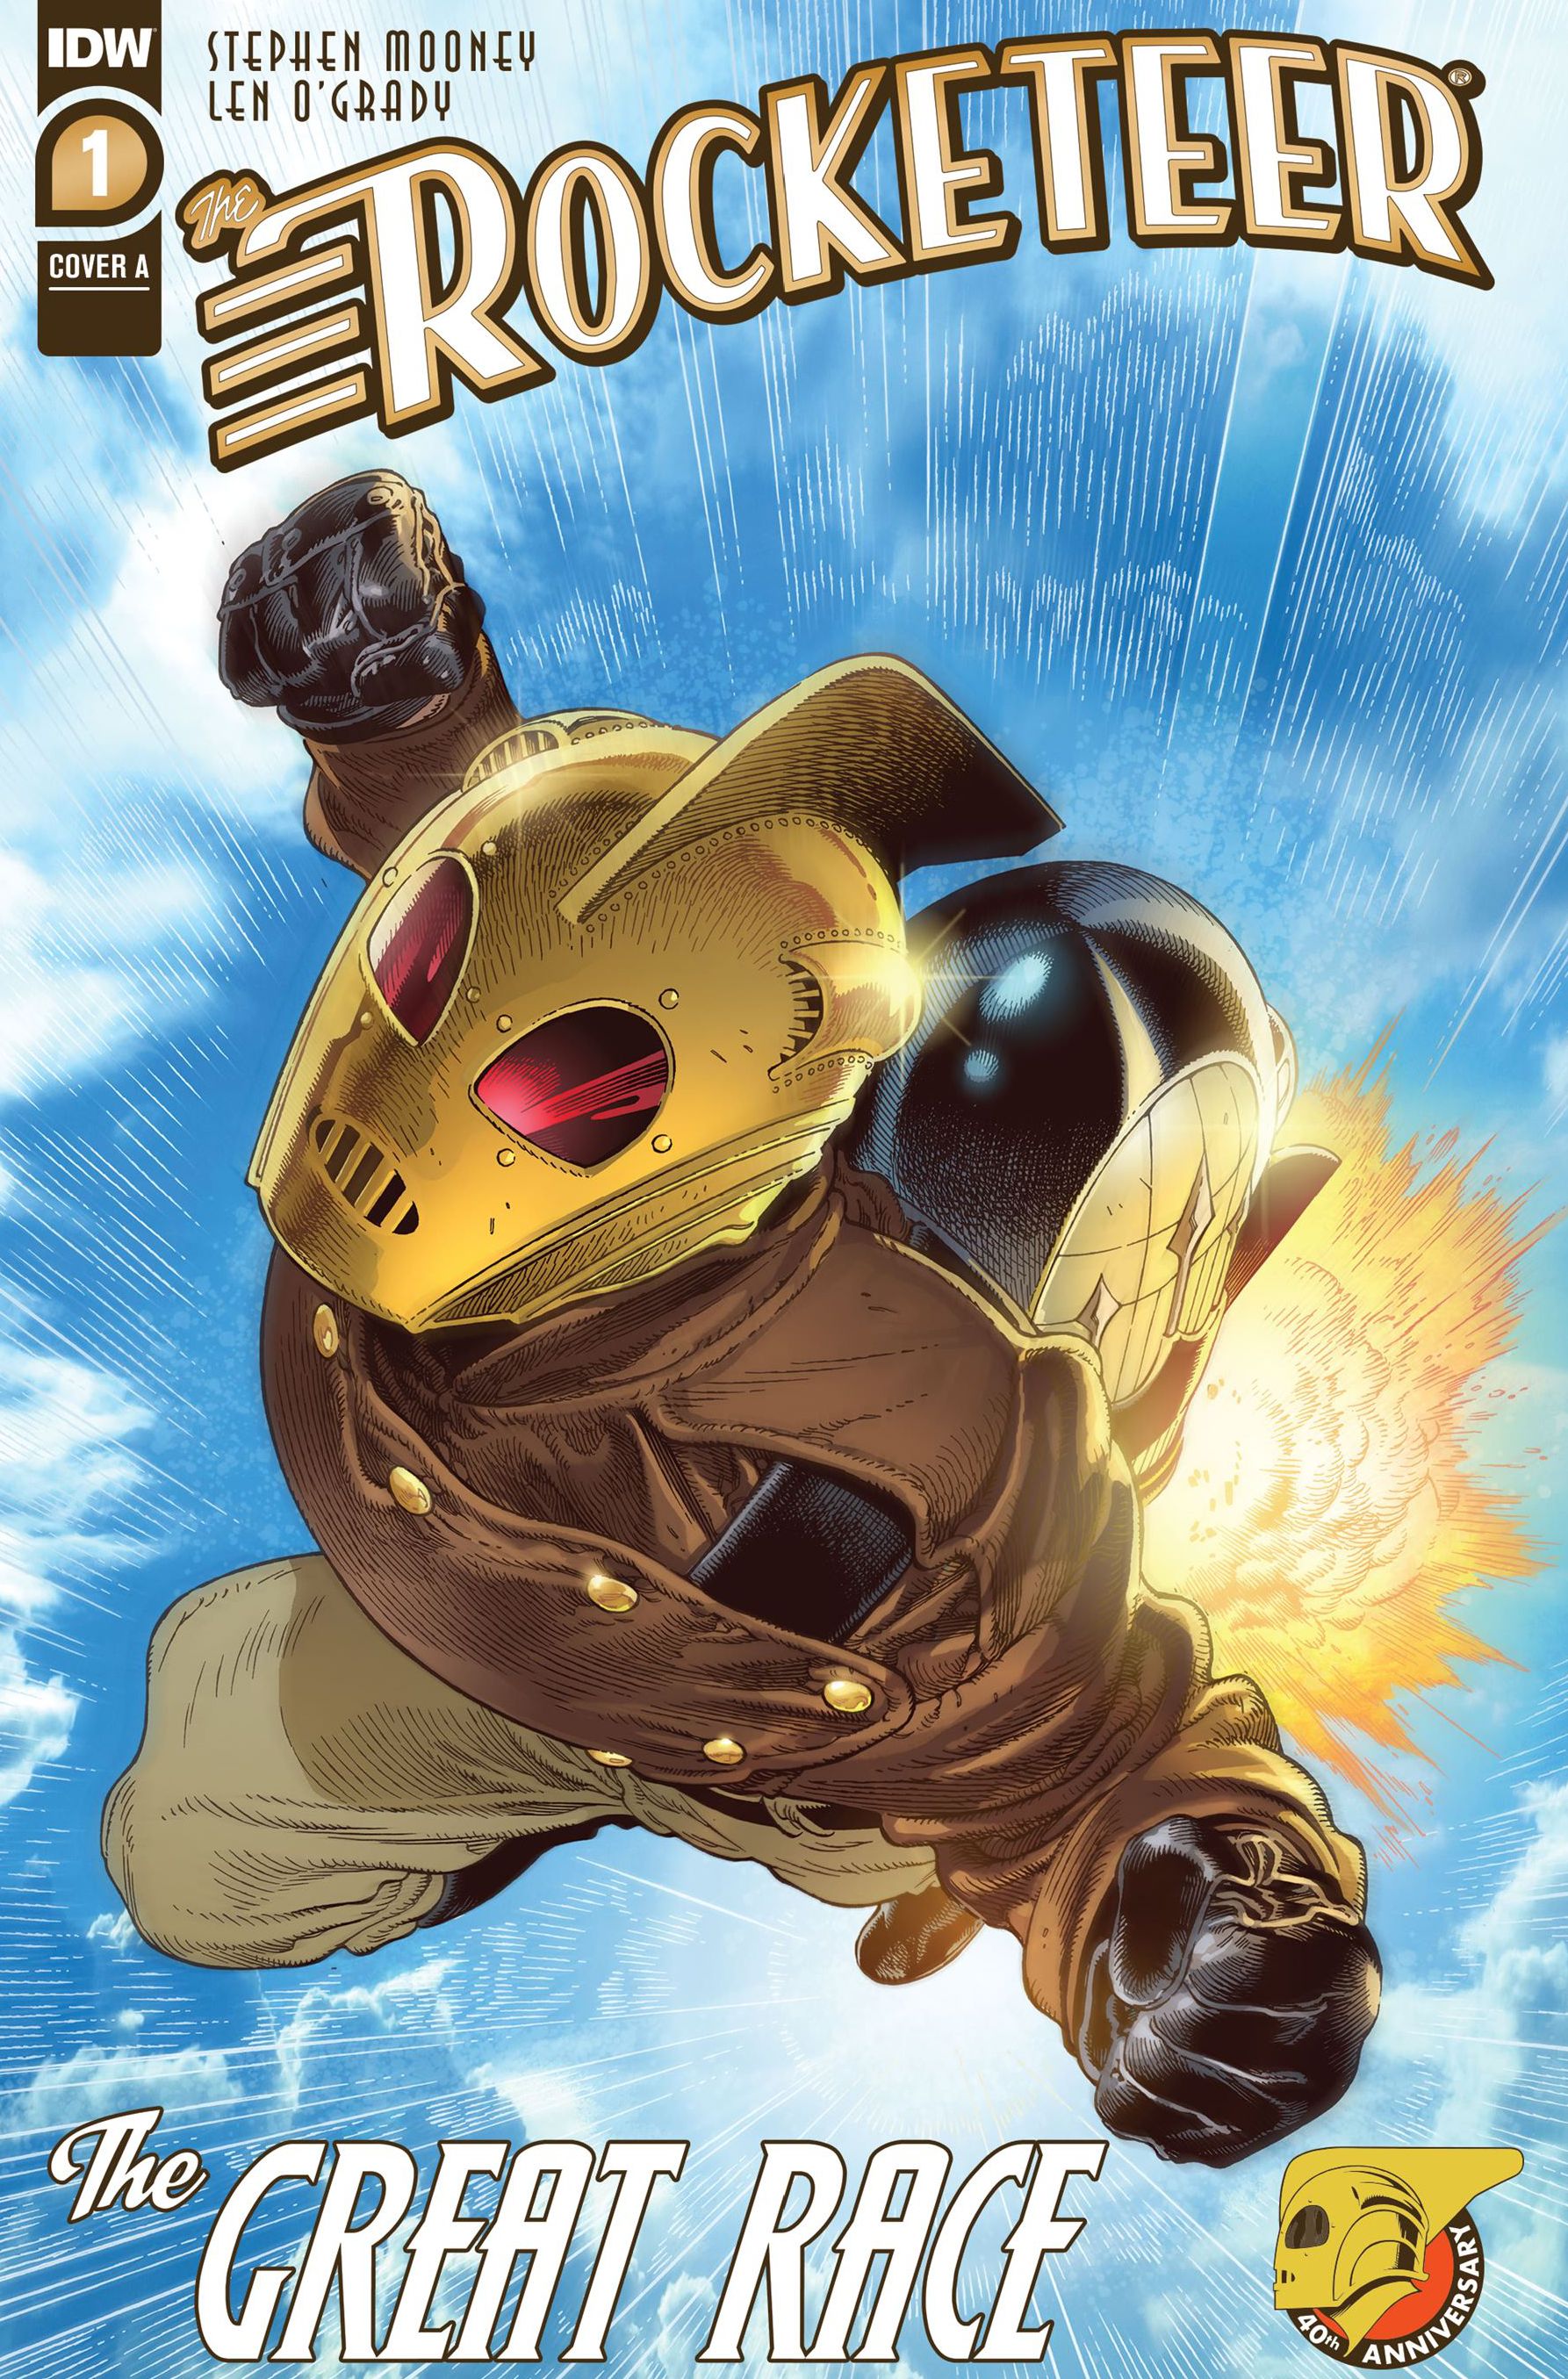 IDW's The Rocketeer: The Great Race #1 Comic Review